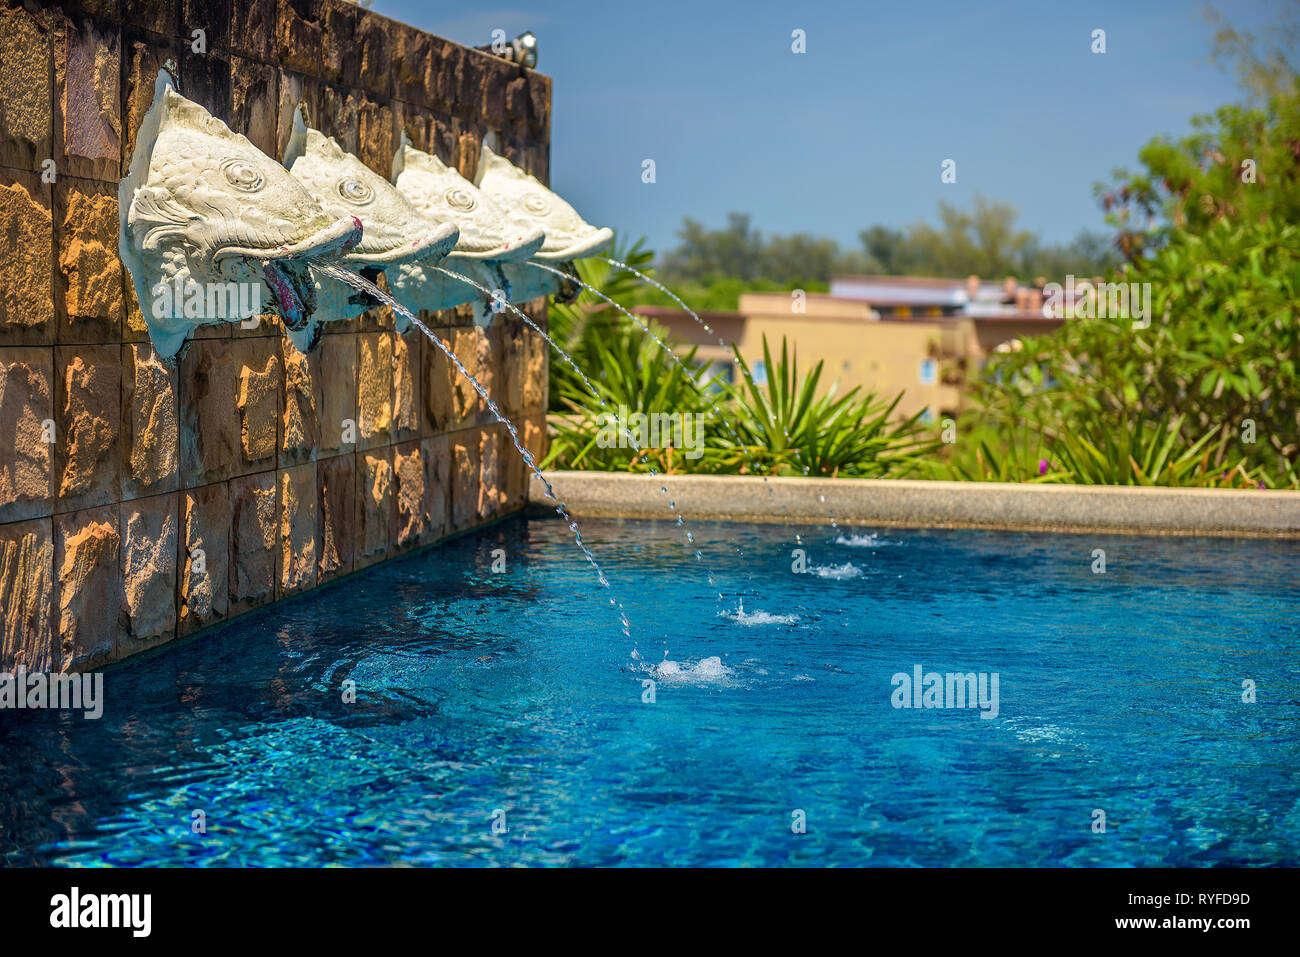 Fish head statues serving as fountains at a swimming pool in Thailand Stock Photo